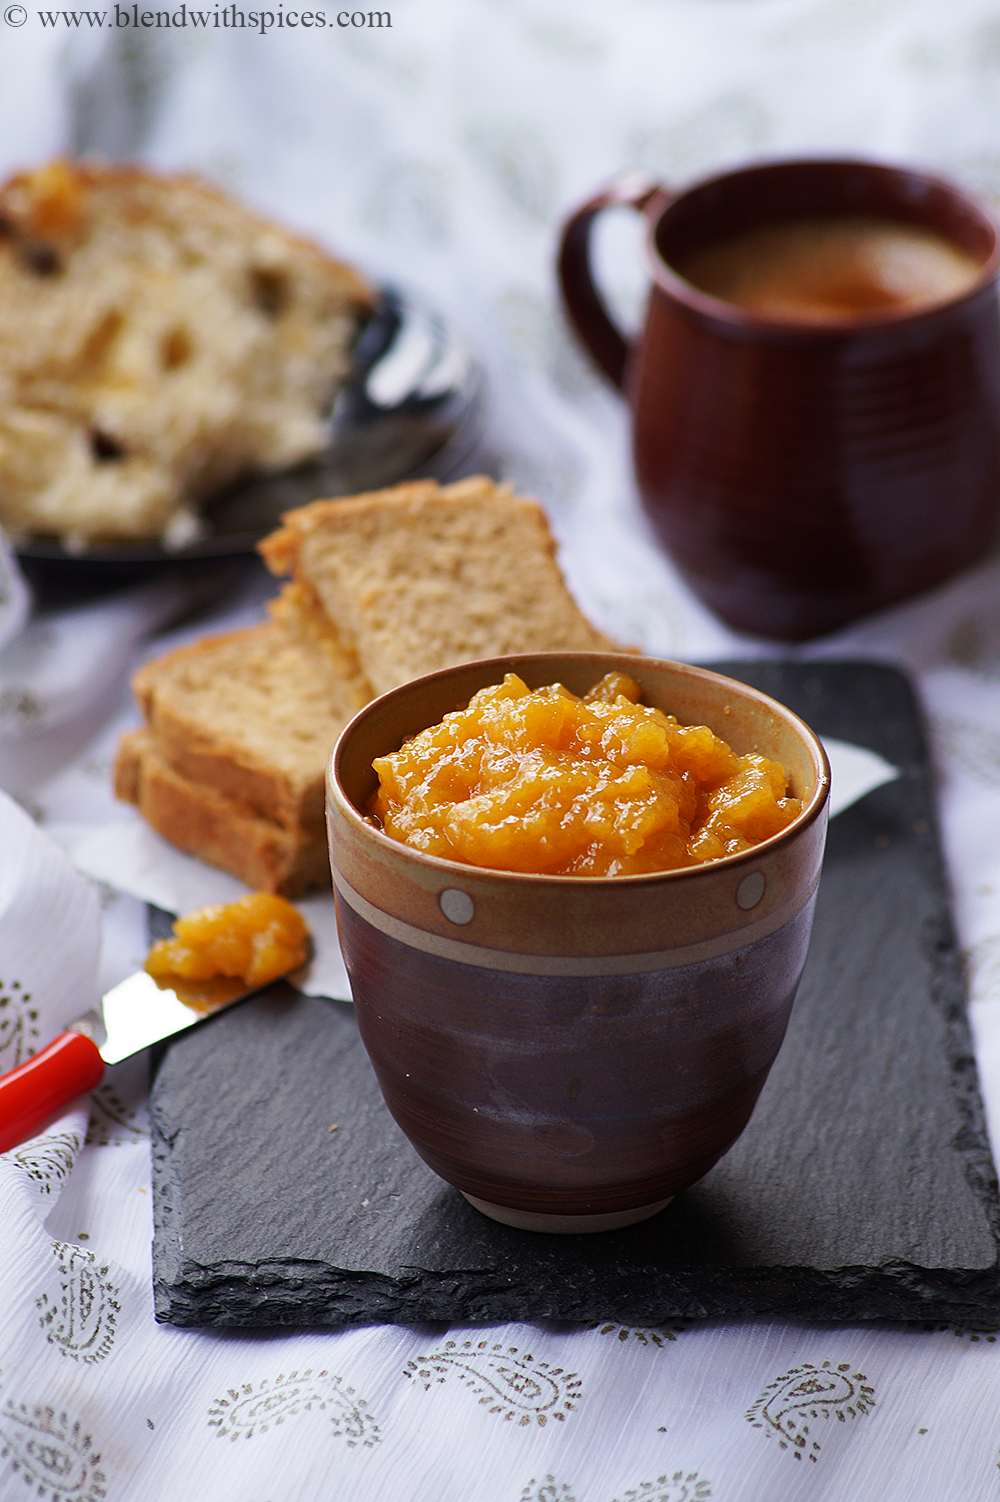 homemade persimmon jam served with bread